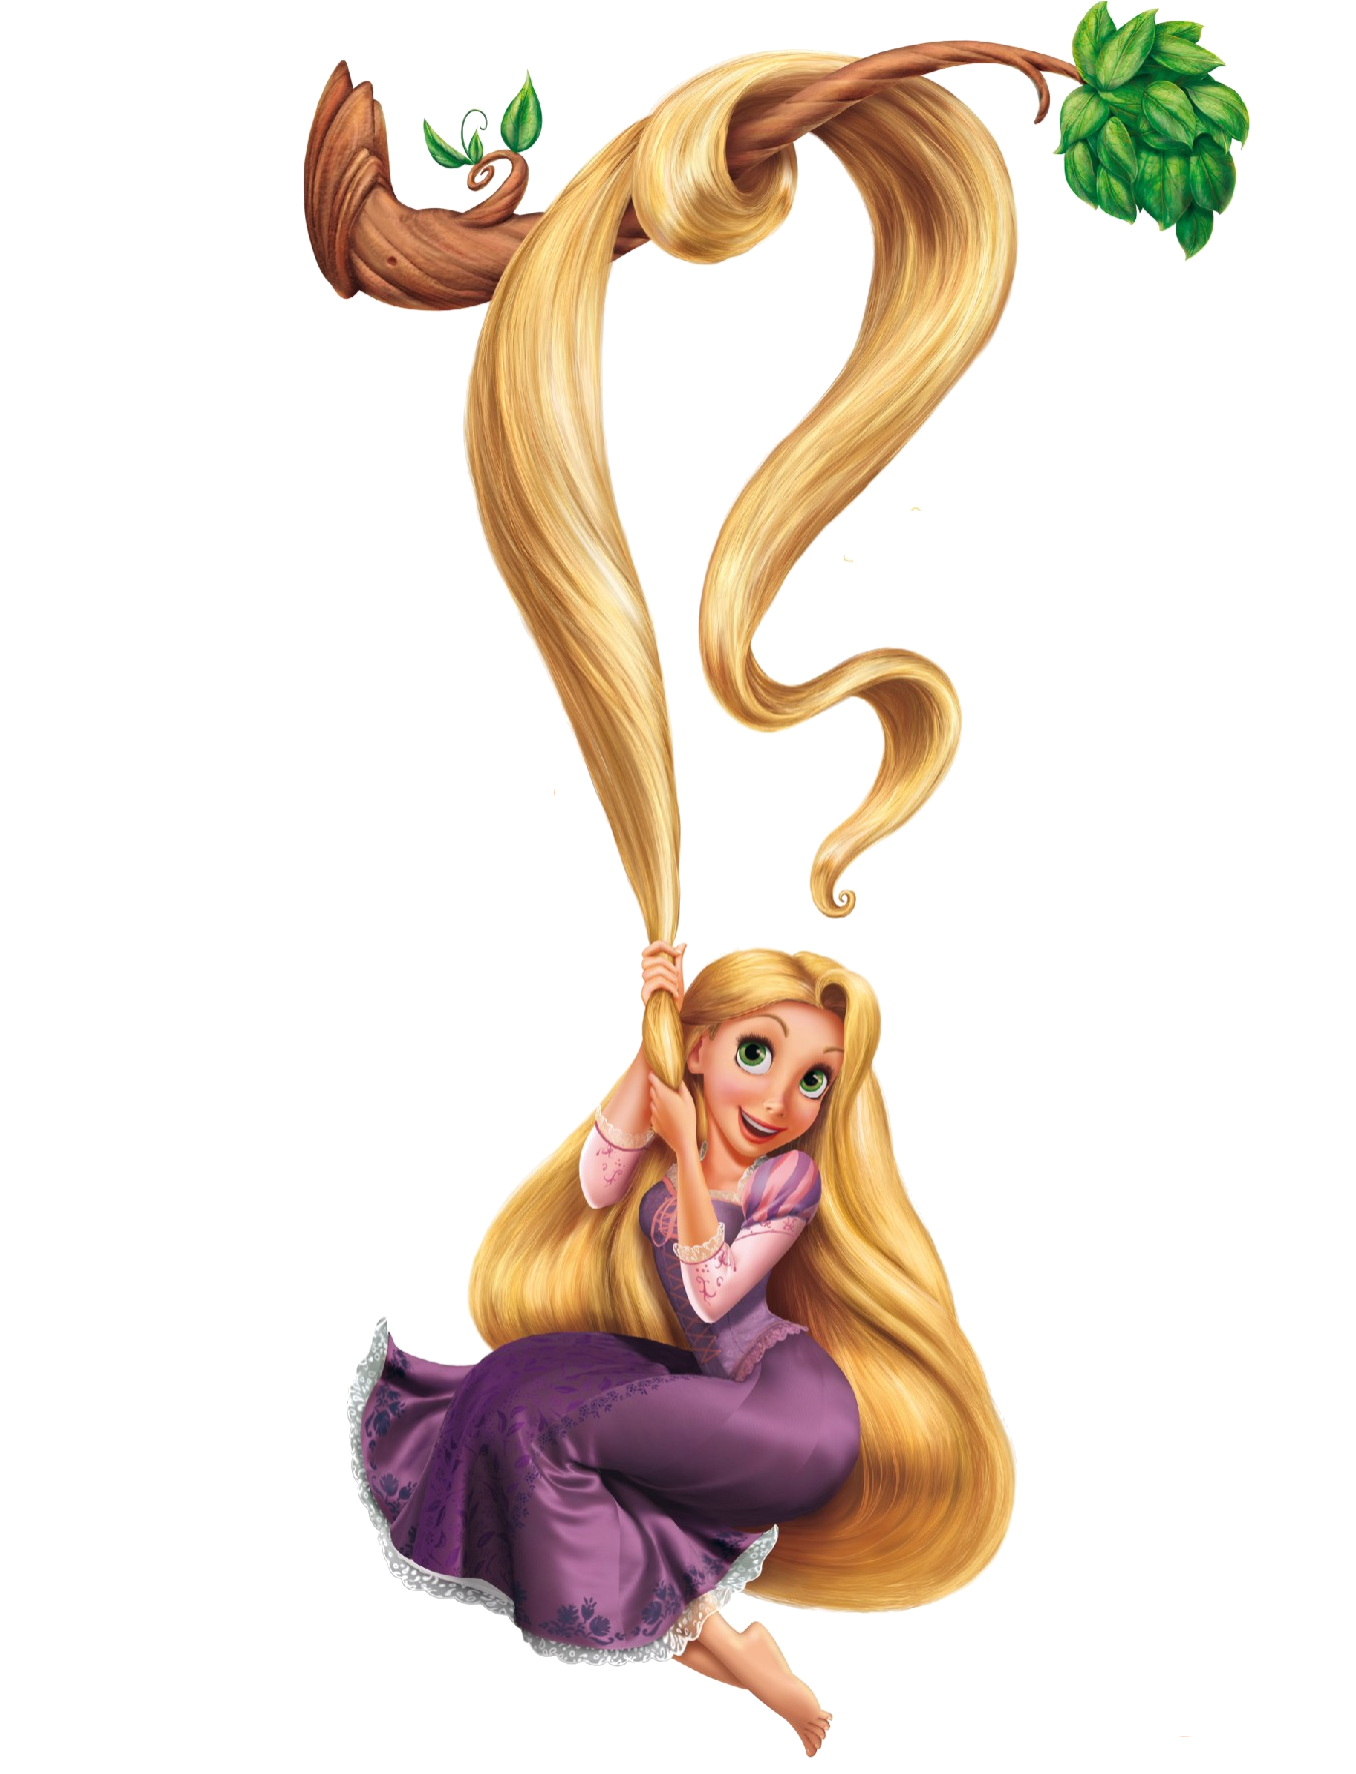 In the Brothers Grimm version, Rapunzel gets knocked up by the prince before they escape, and the evil sorceress figures it out. The sorceress cuts off Rapunzel's hair and throws her out into the wilderness. When the prince shows up to see her, the sorceress dangles Rapunzel's cut-off hair to lure him, and tells him he will never see Rapunzel again. He jumps out the window in despair and is blinded from the thorns below. He wanders around aimlessly, he is blind. Rapunzel gives birth to twins. He is eventually guided back to her when he hears her voice. Her tears restore his sight. They return to the prince's kingdom and live happily ever after.